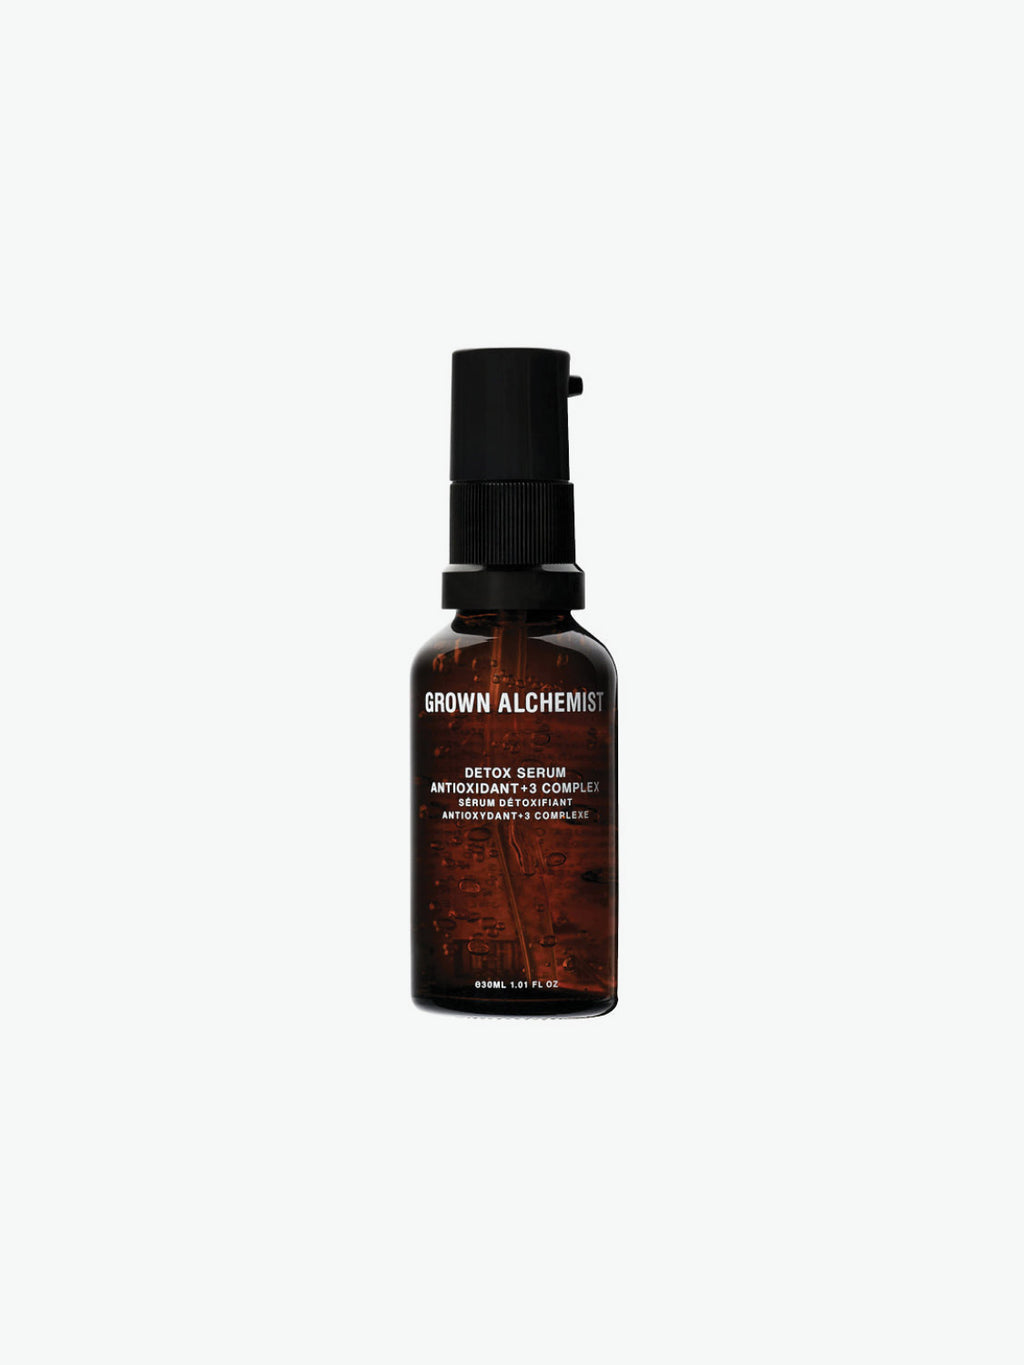 Grown Alchemist | Grooming Care and Garments | The Project